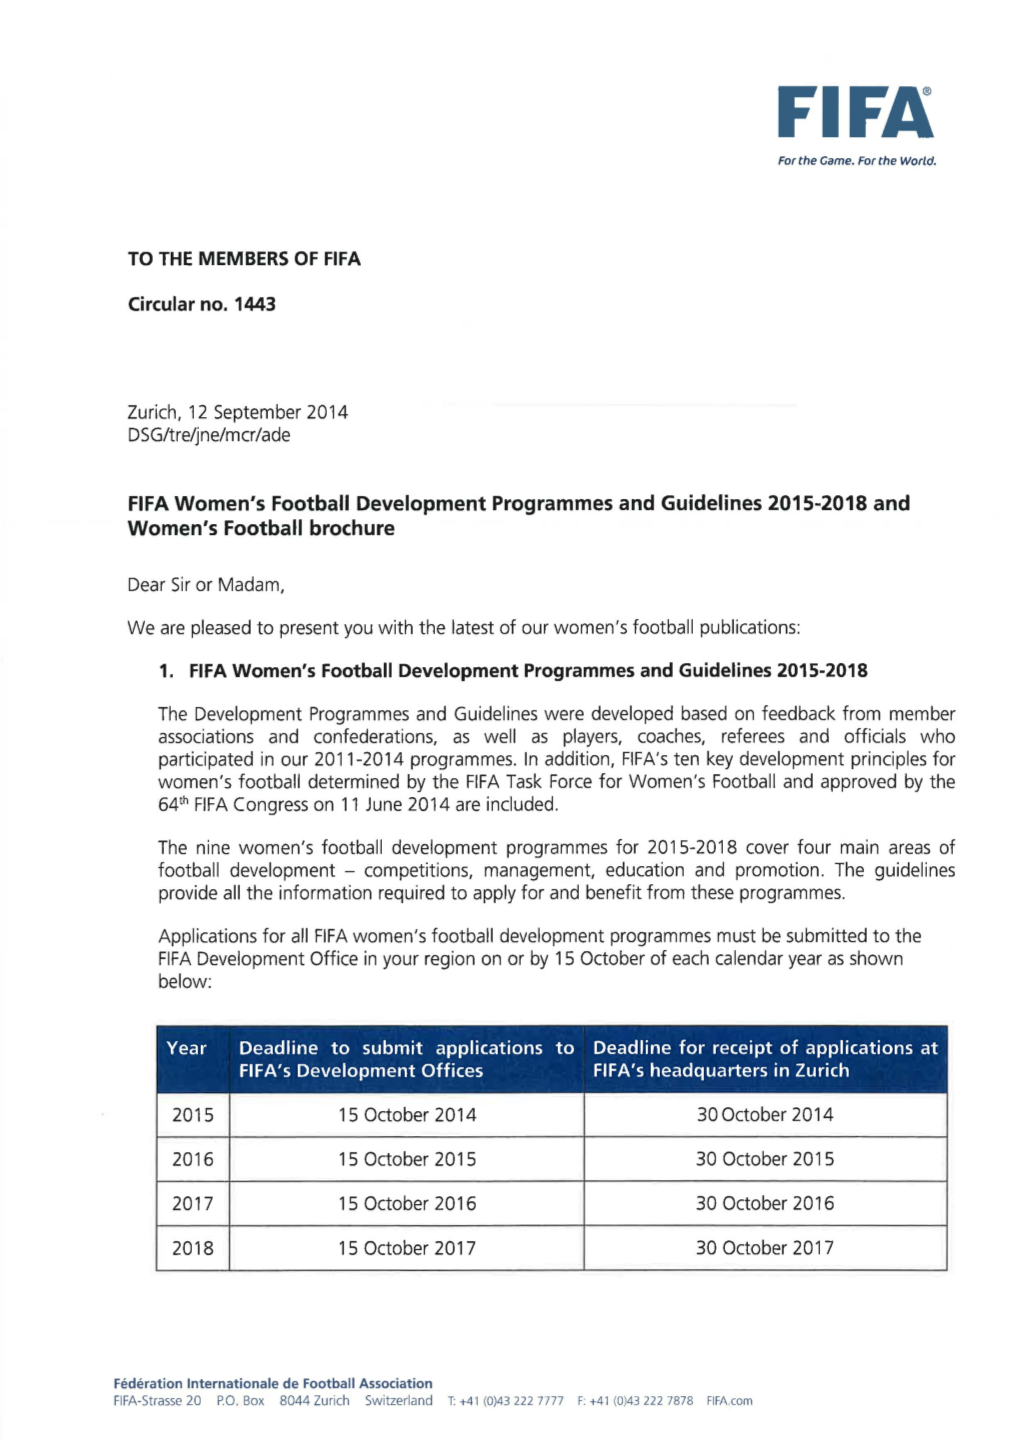 FIFA Women's Football Development Programmes and Guidelines 2015-2018 and Women's Football Brochure